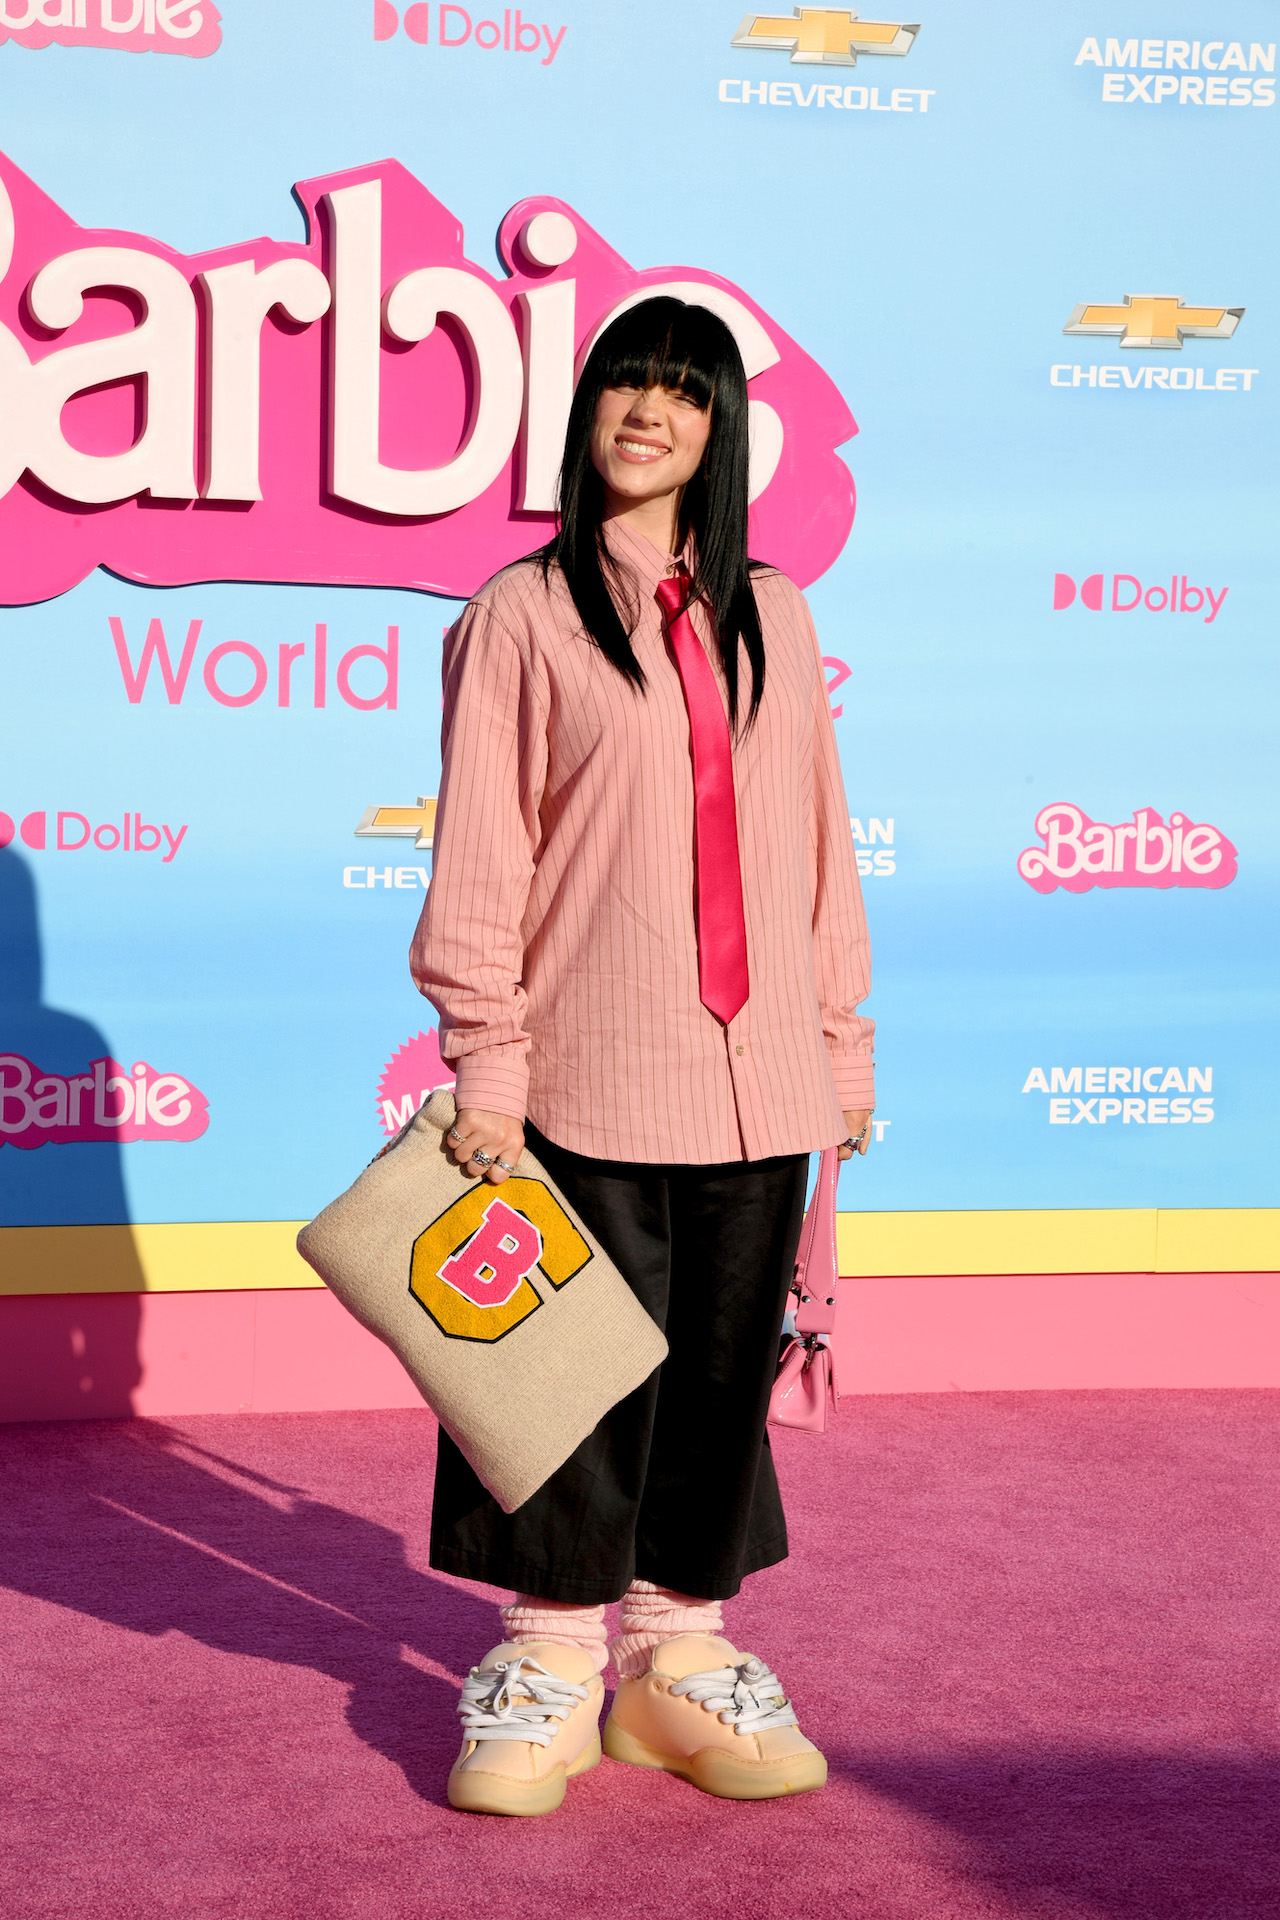 LOS ANGELES, CALIFORNIA – JULY 09: Billie Eilish attends the world premiere of 